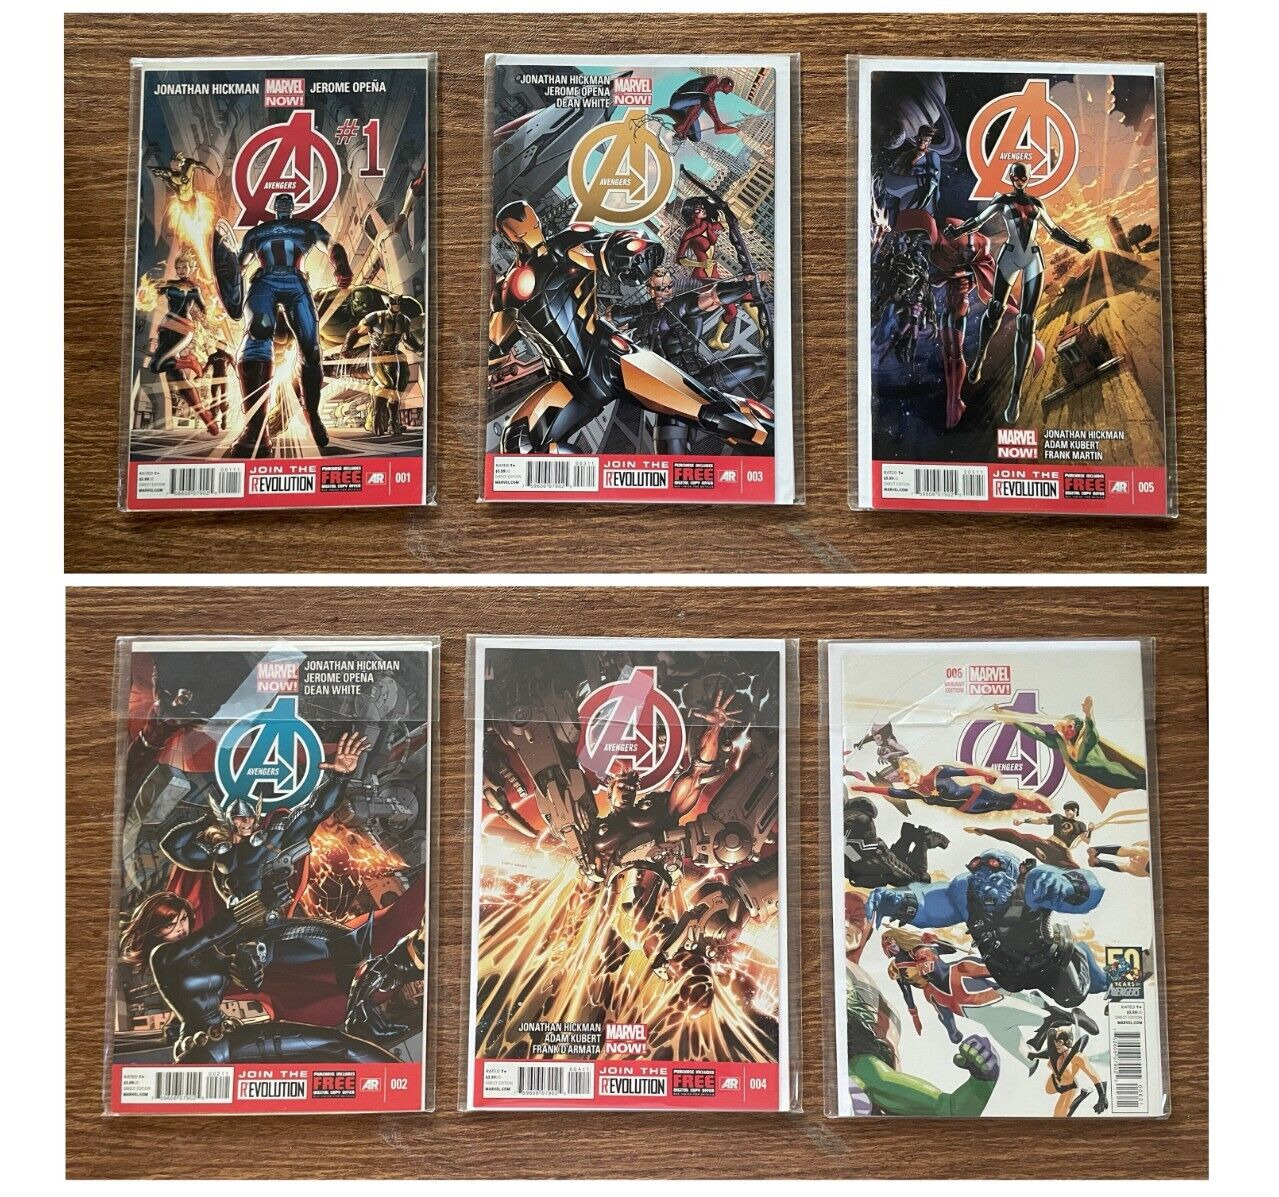 Avengers (2012) issues #1-6 by Jonathan Hickman, 1st Arc: \